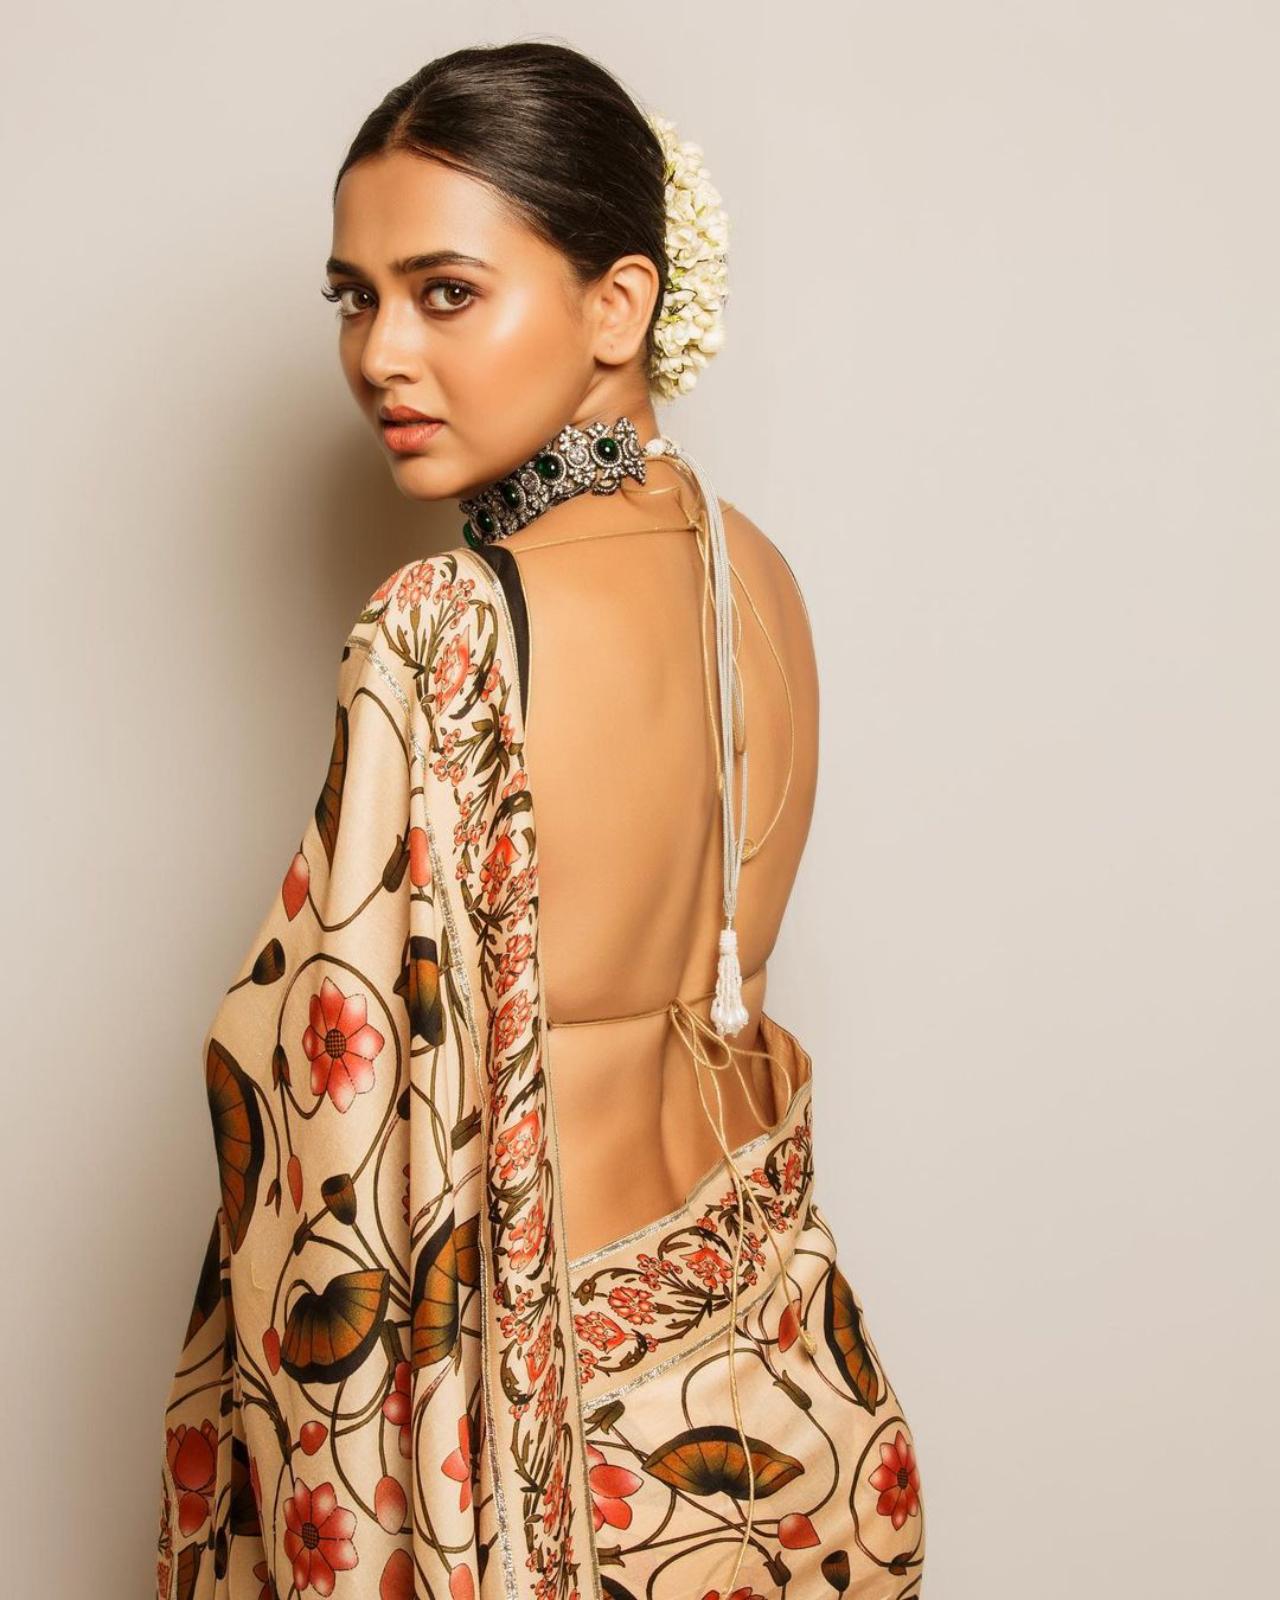 Tejasswi donned a beautiful printed saree with a black backless blouse which stole the limelight